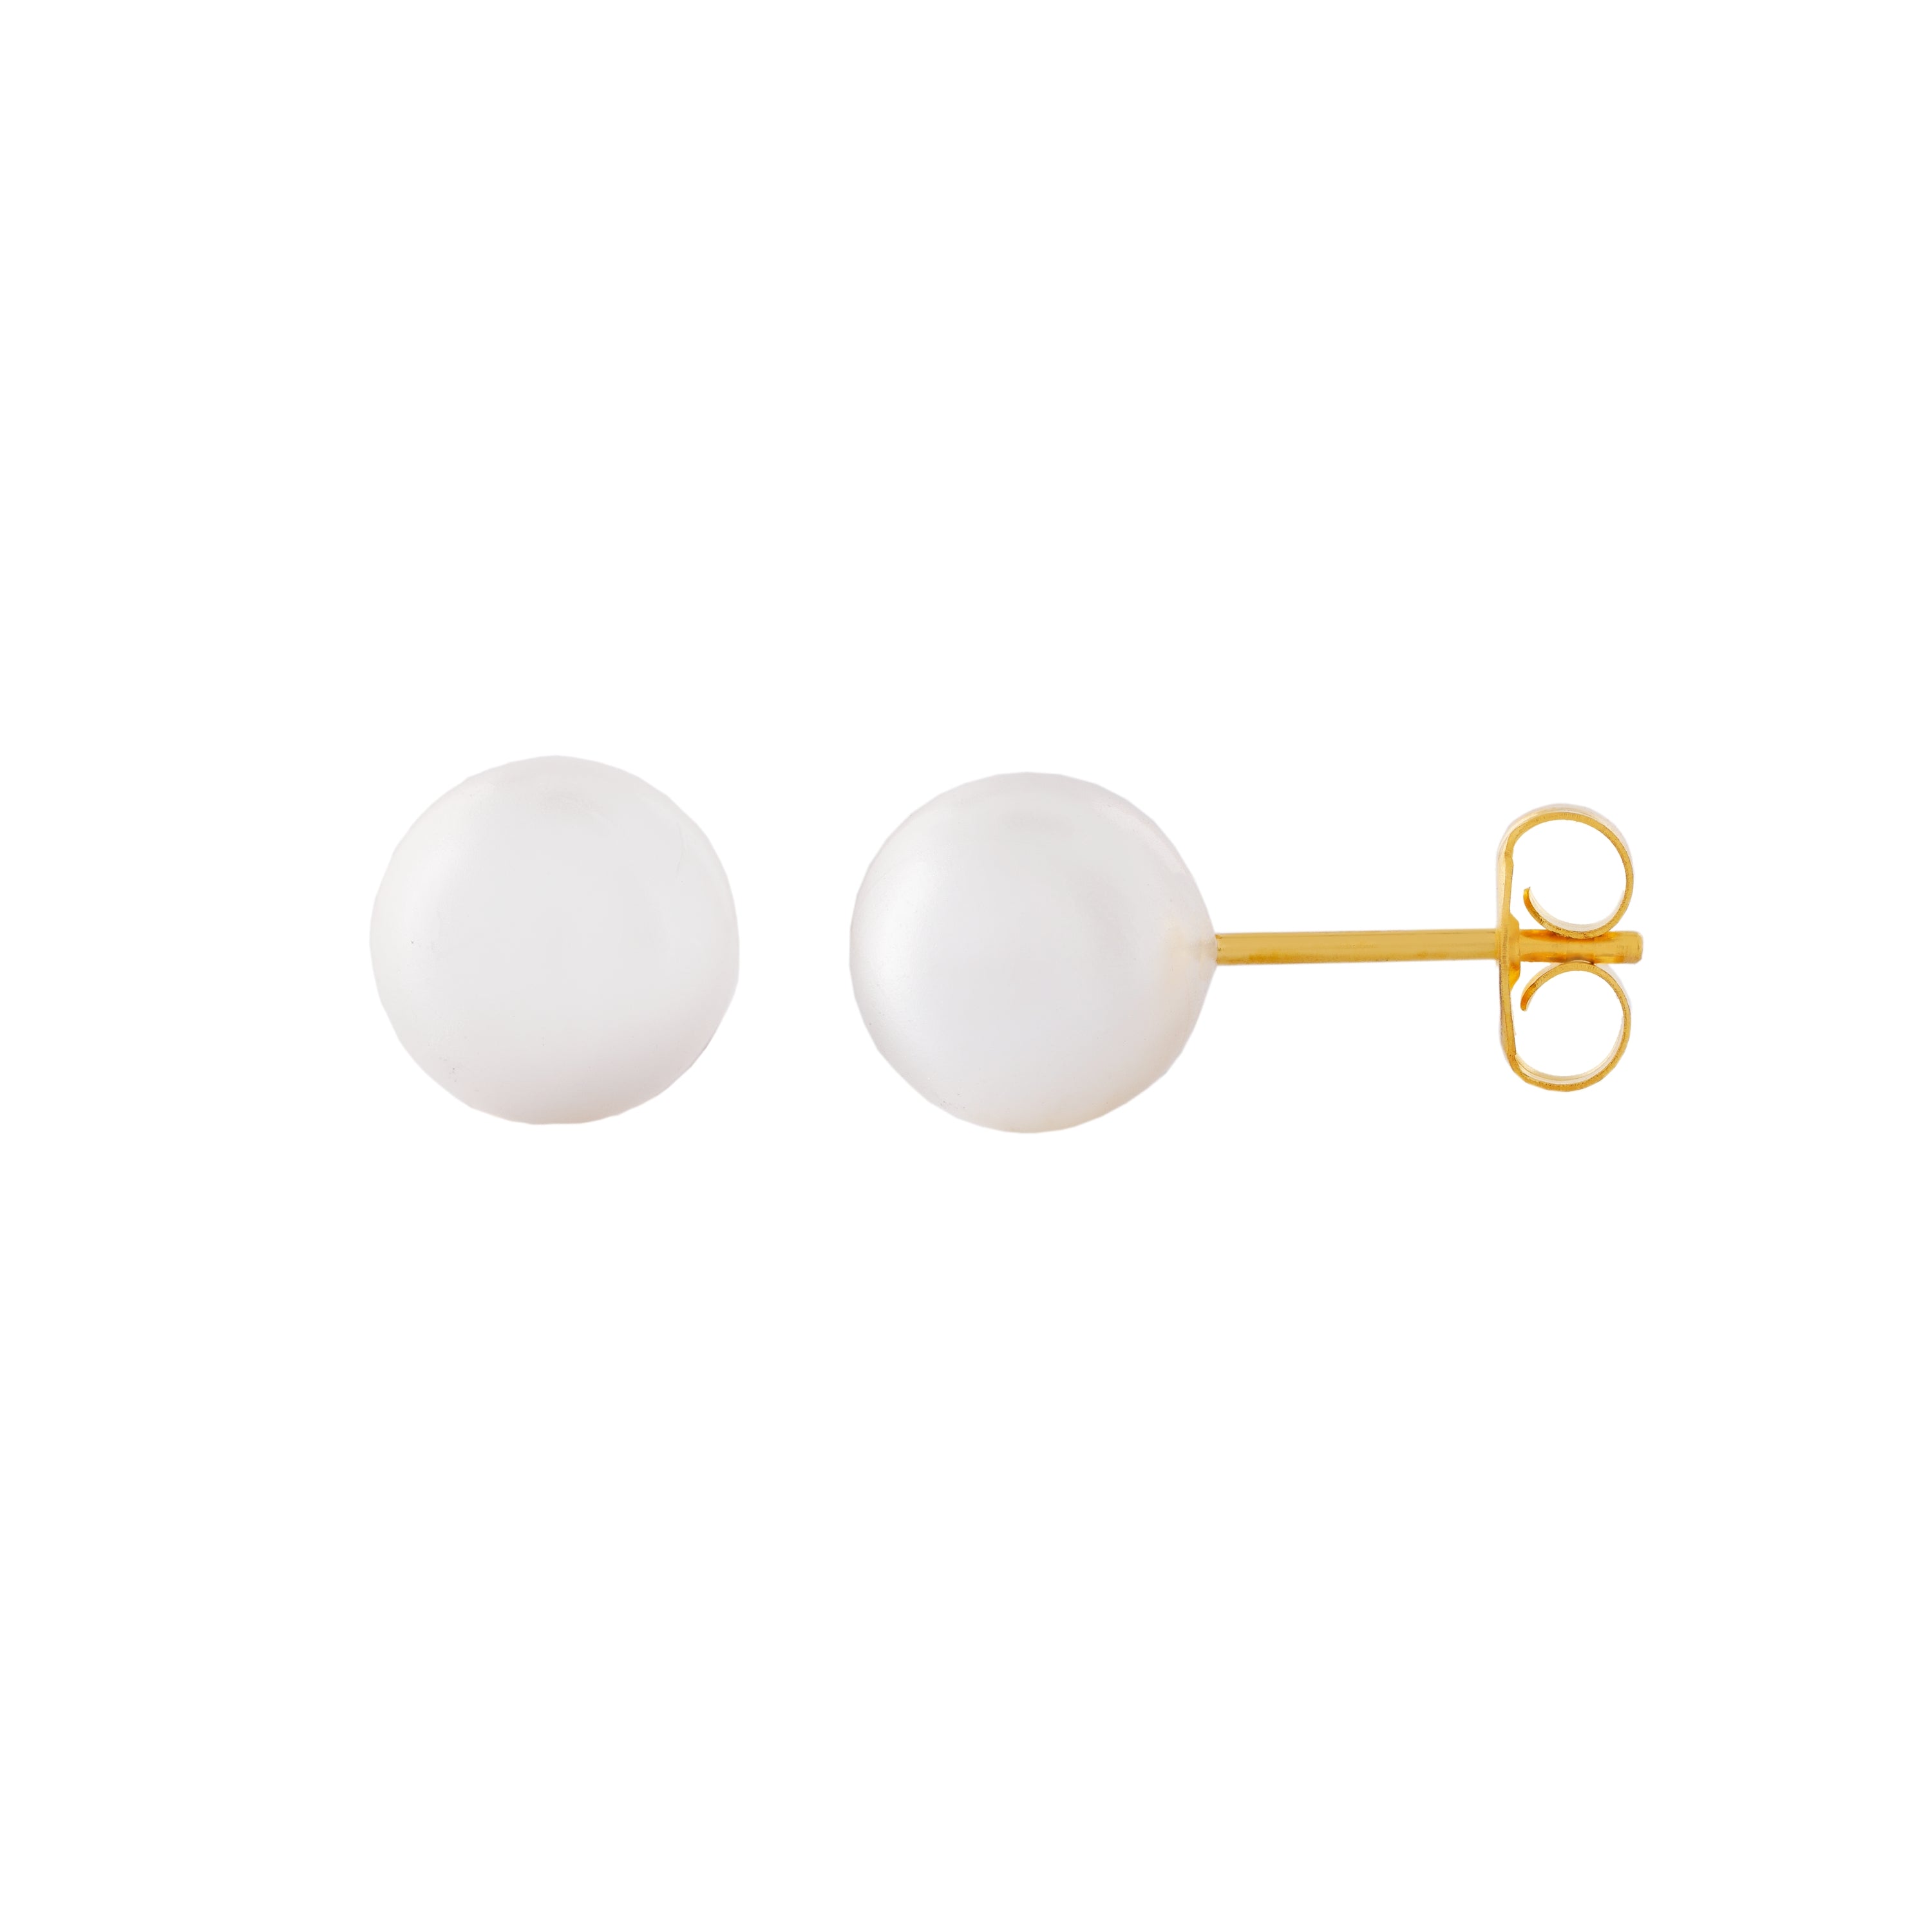 8MM White Pearl 24K Pure Gold Plated Ear Studs | MADE IN USA | Ideal for everyday wear